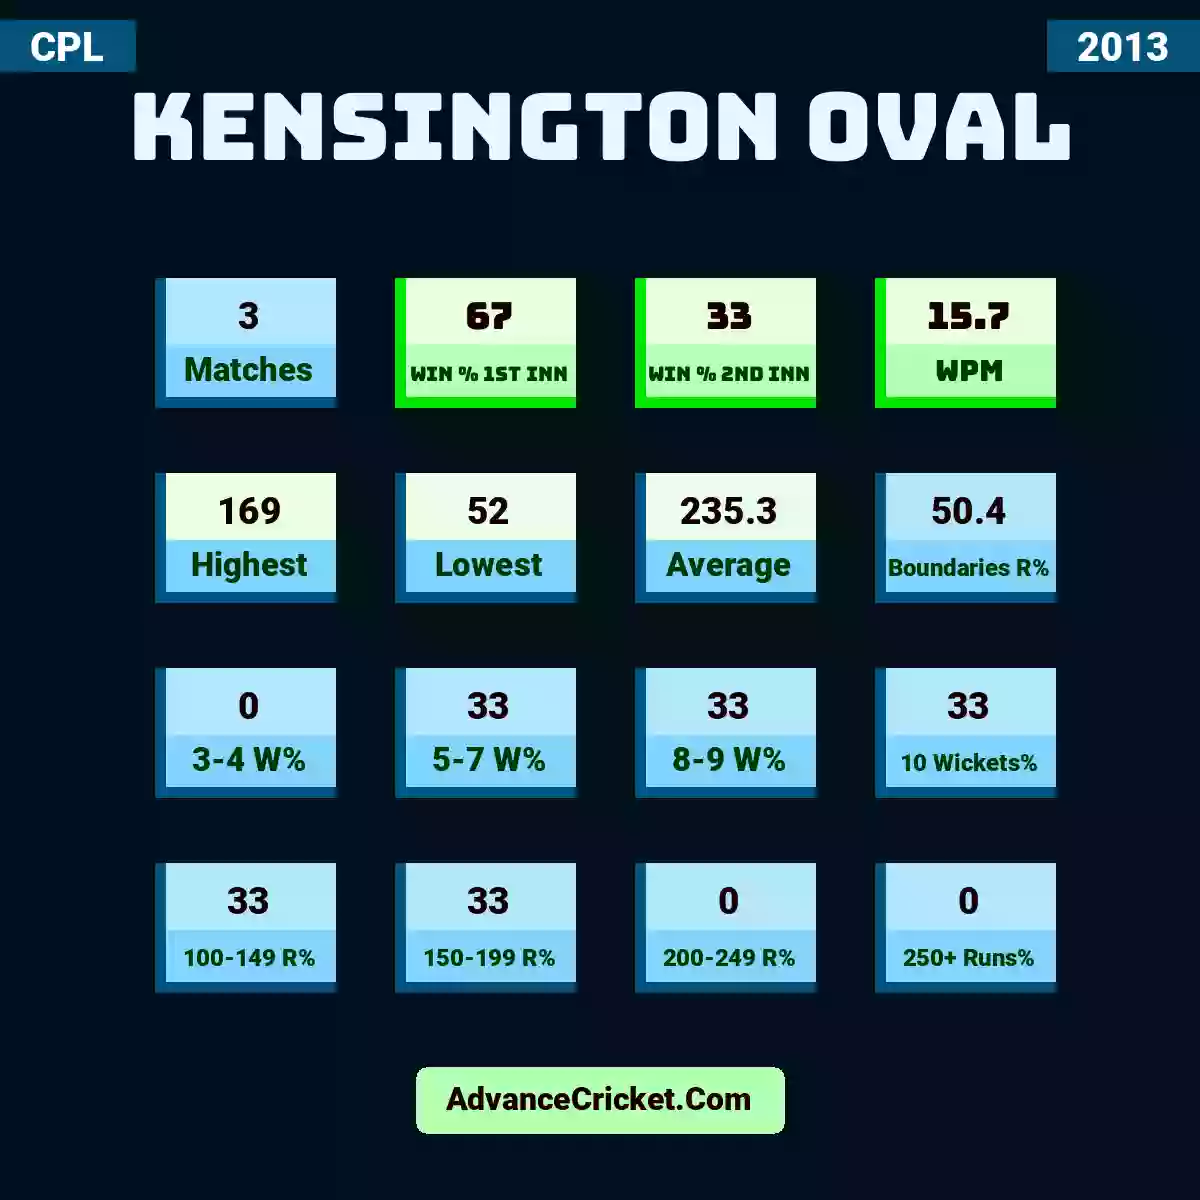 Image showing Kensington Oval with Matches: 3, Win % 1st Inn: 67, Win % 2nd Inn: 33, WPM: 15.7, Highest: 169, Lowest: 52, Average: 235.3, Boundaries R%: 50.4, 3-4 W%: 0, 5-7 W%: 33, 8-9 W%: 33, 10 Wickets%: 33, 100-149 R%: 33, 150-199 R%: 33, 200-249 R%: 0, 250+ Runs%: 0.